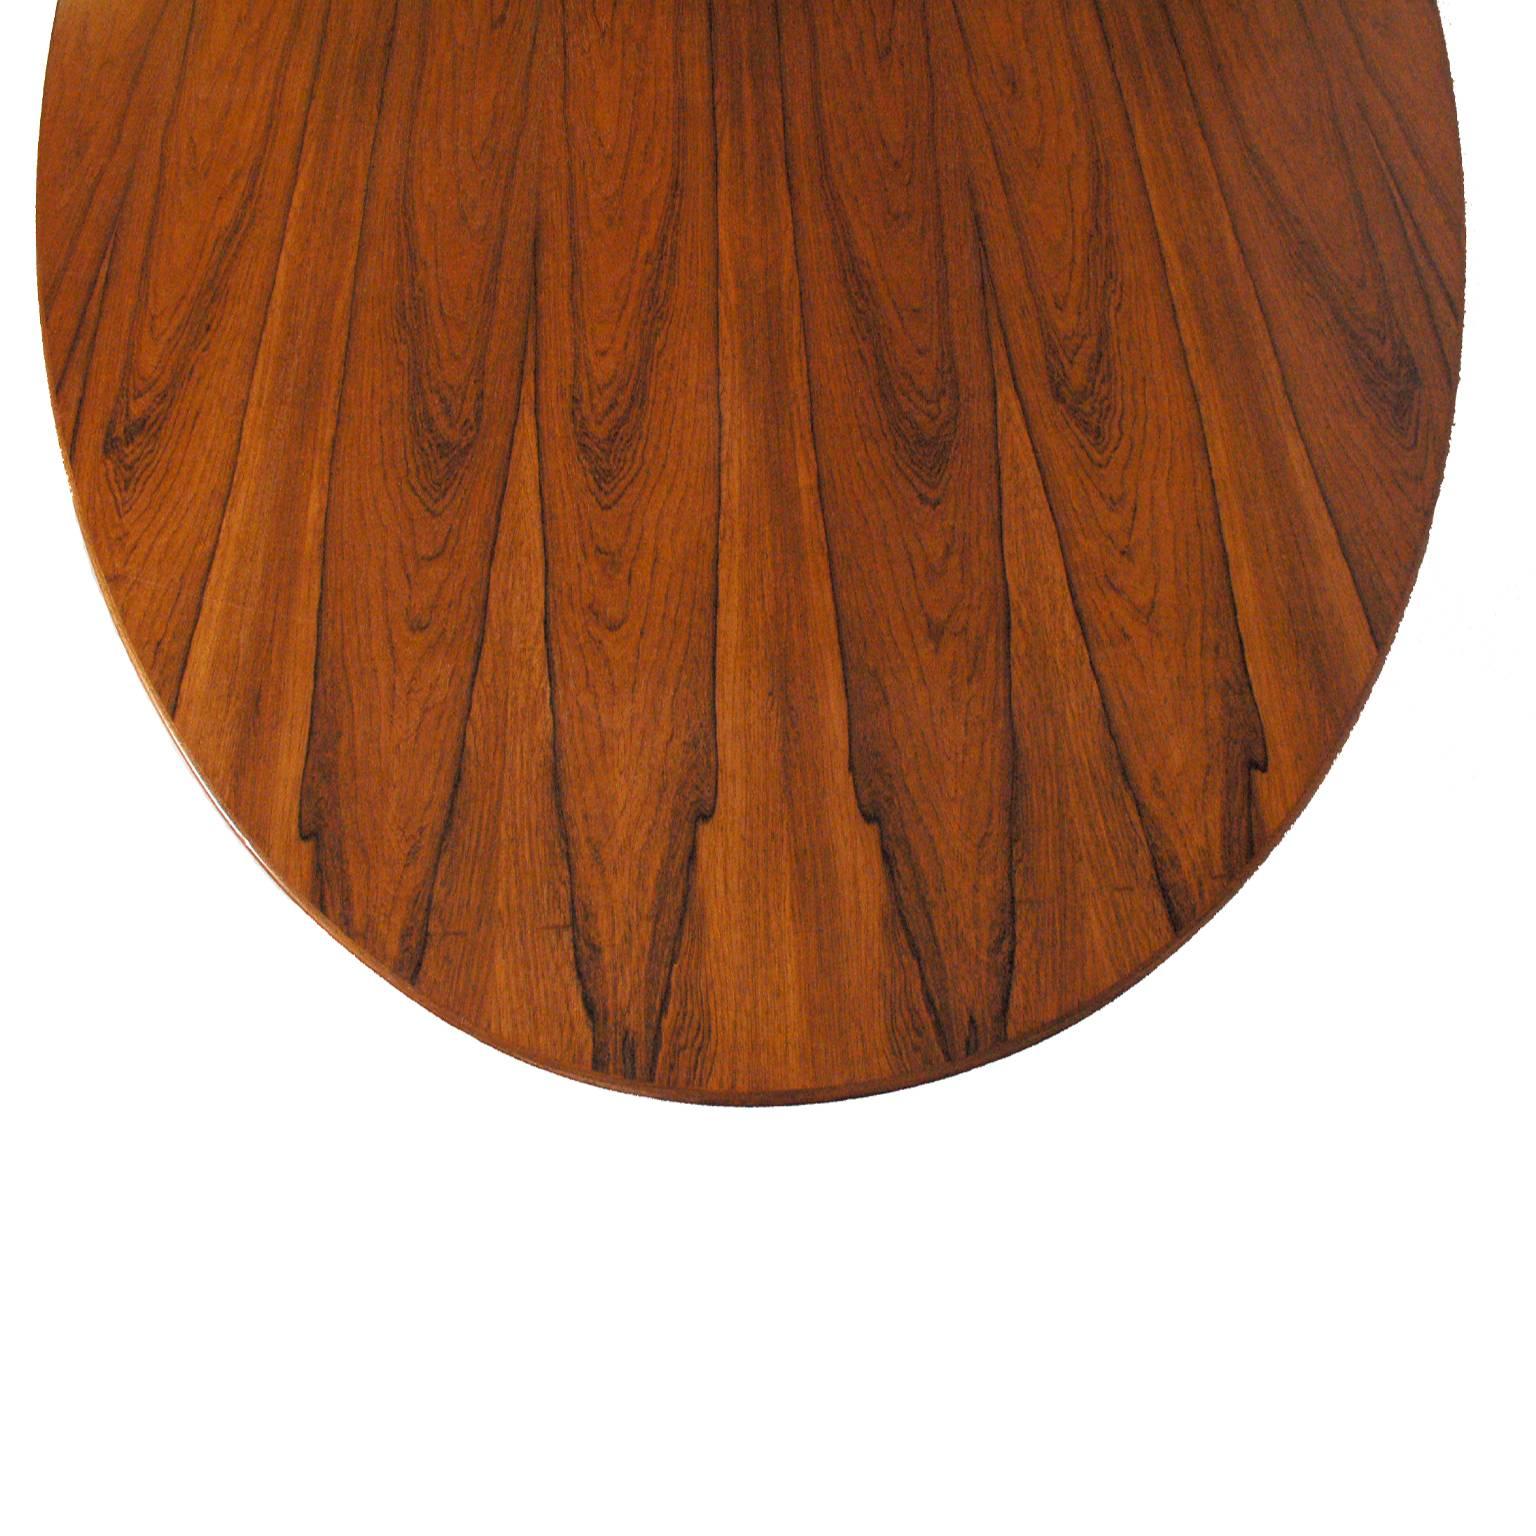 American Oval Rosewood Table or Desk by Florence Knoll